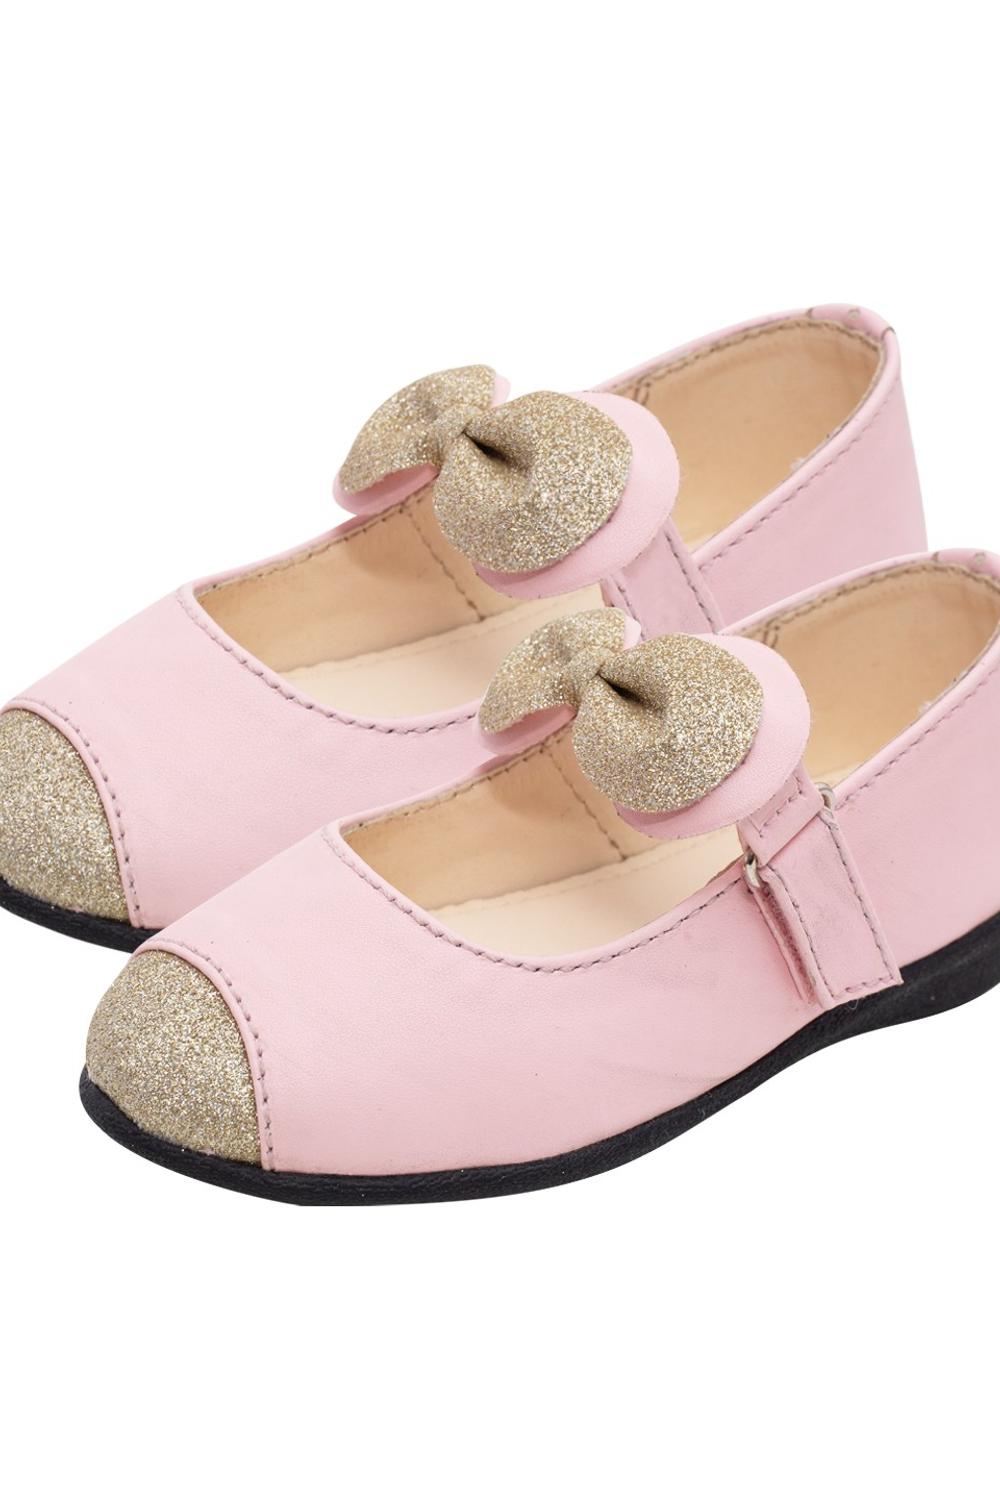 Me Mee Baby Girls Bally Shoes, Pink